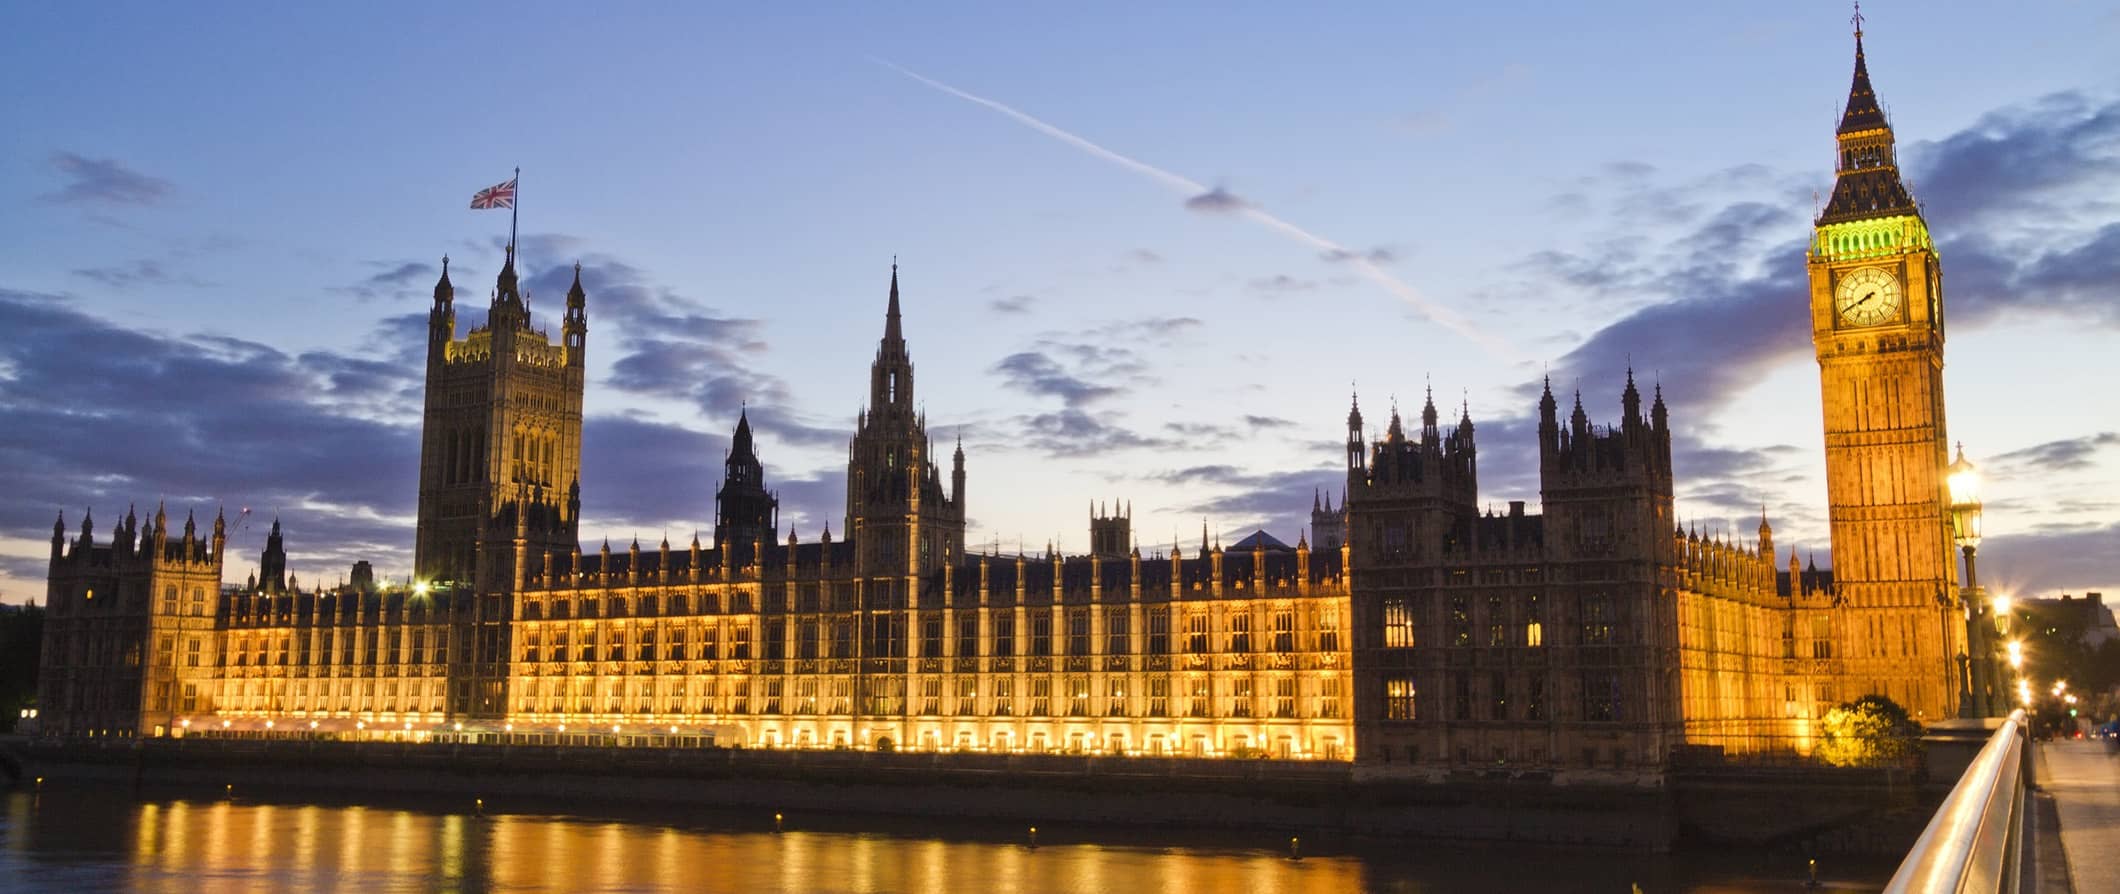 The iconic London Parliament building lit up at night in bustling London, England